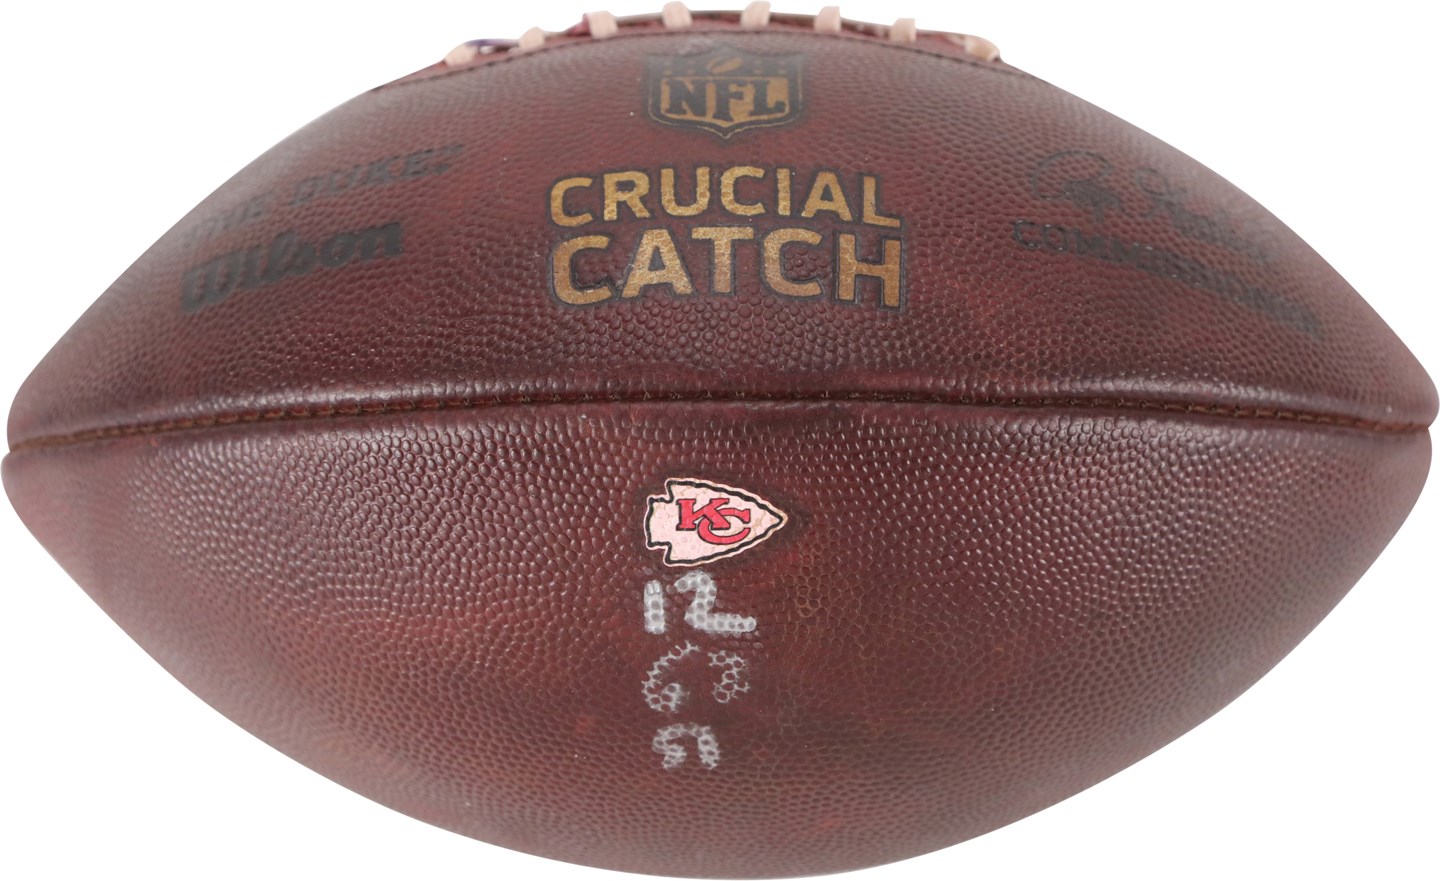 Football - 2017 James Harrison Game Used Football from Last Sack as a Pittsburgh Steeler - Sets Steelers All-Time Record! (ex-James Harrison Collection)